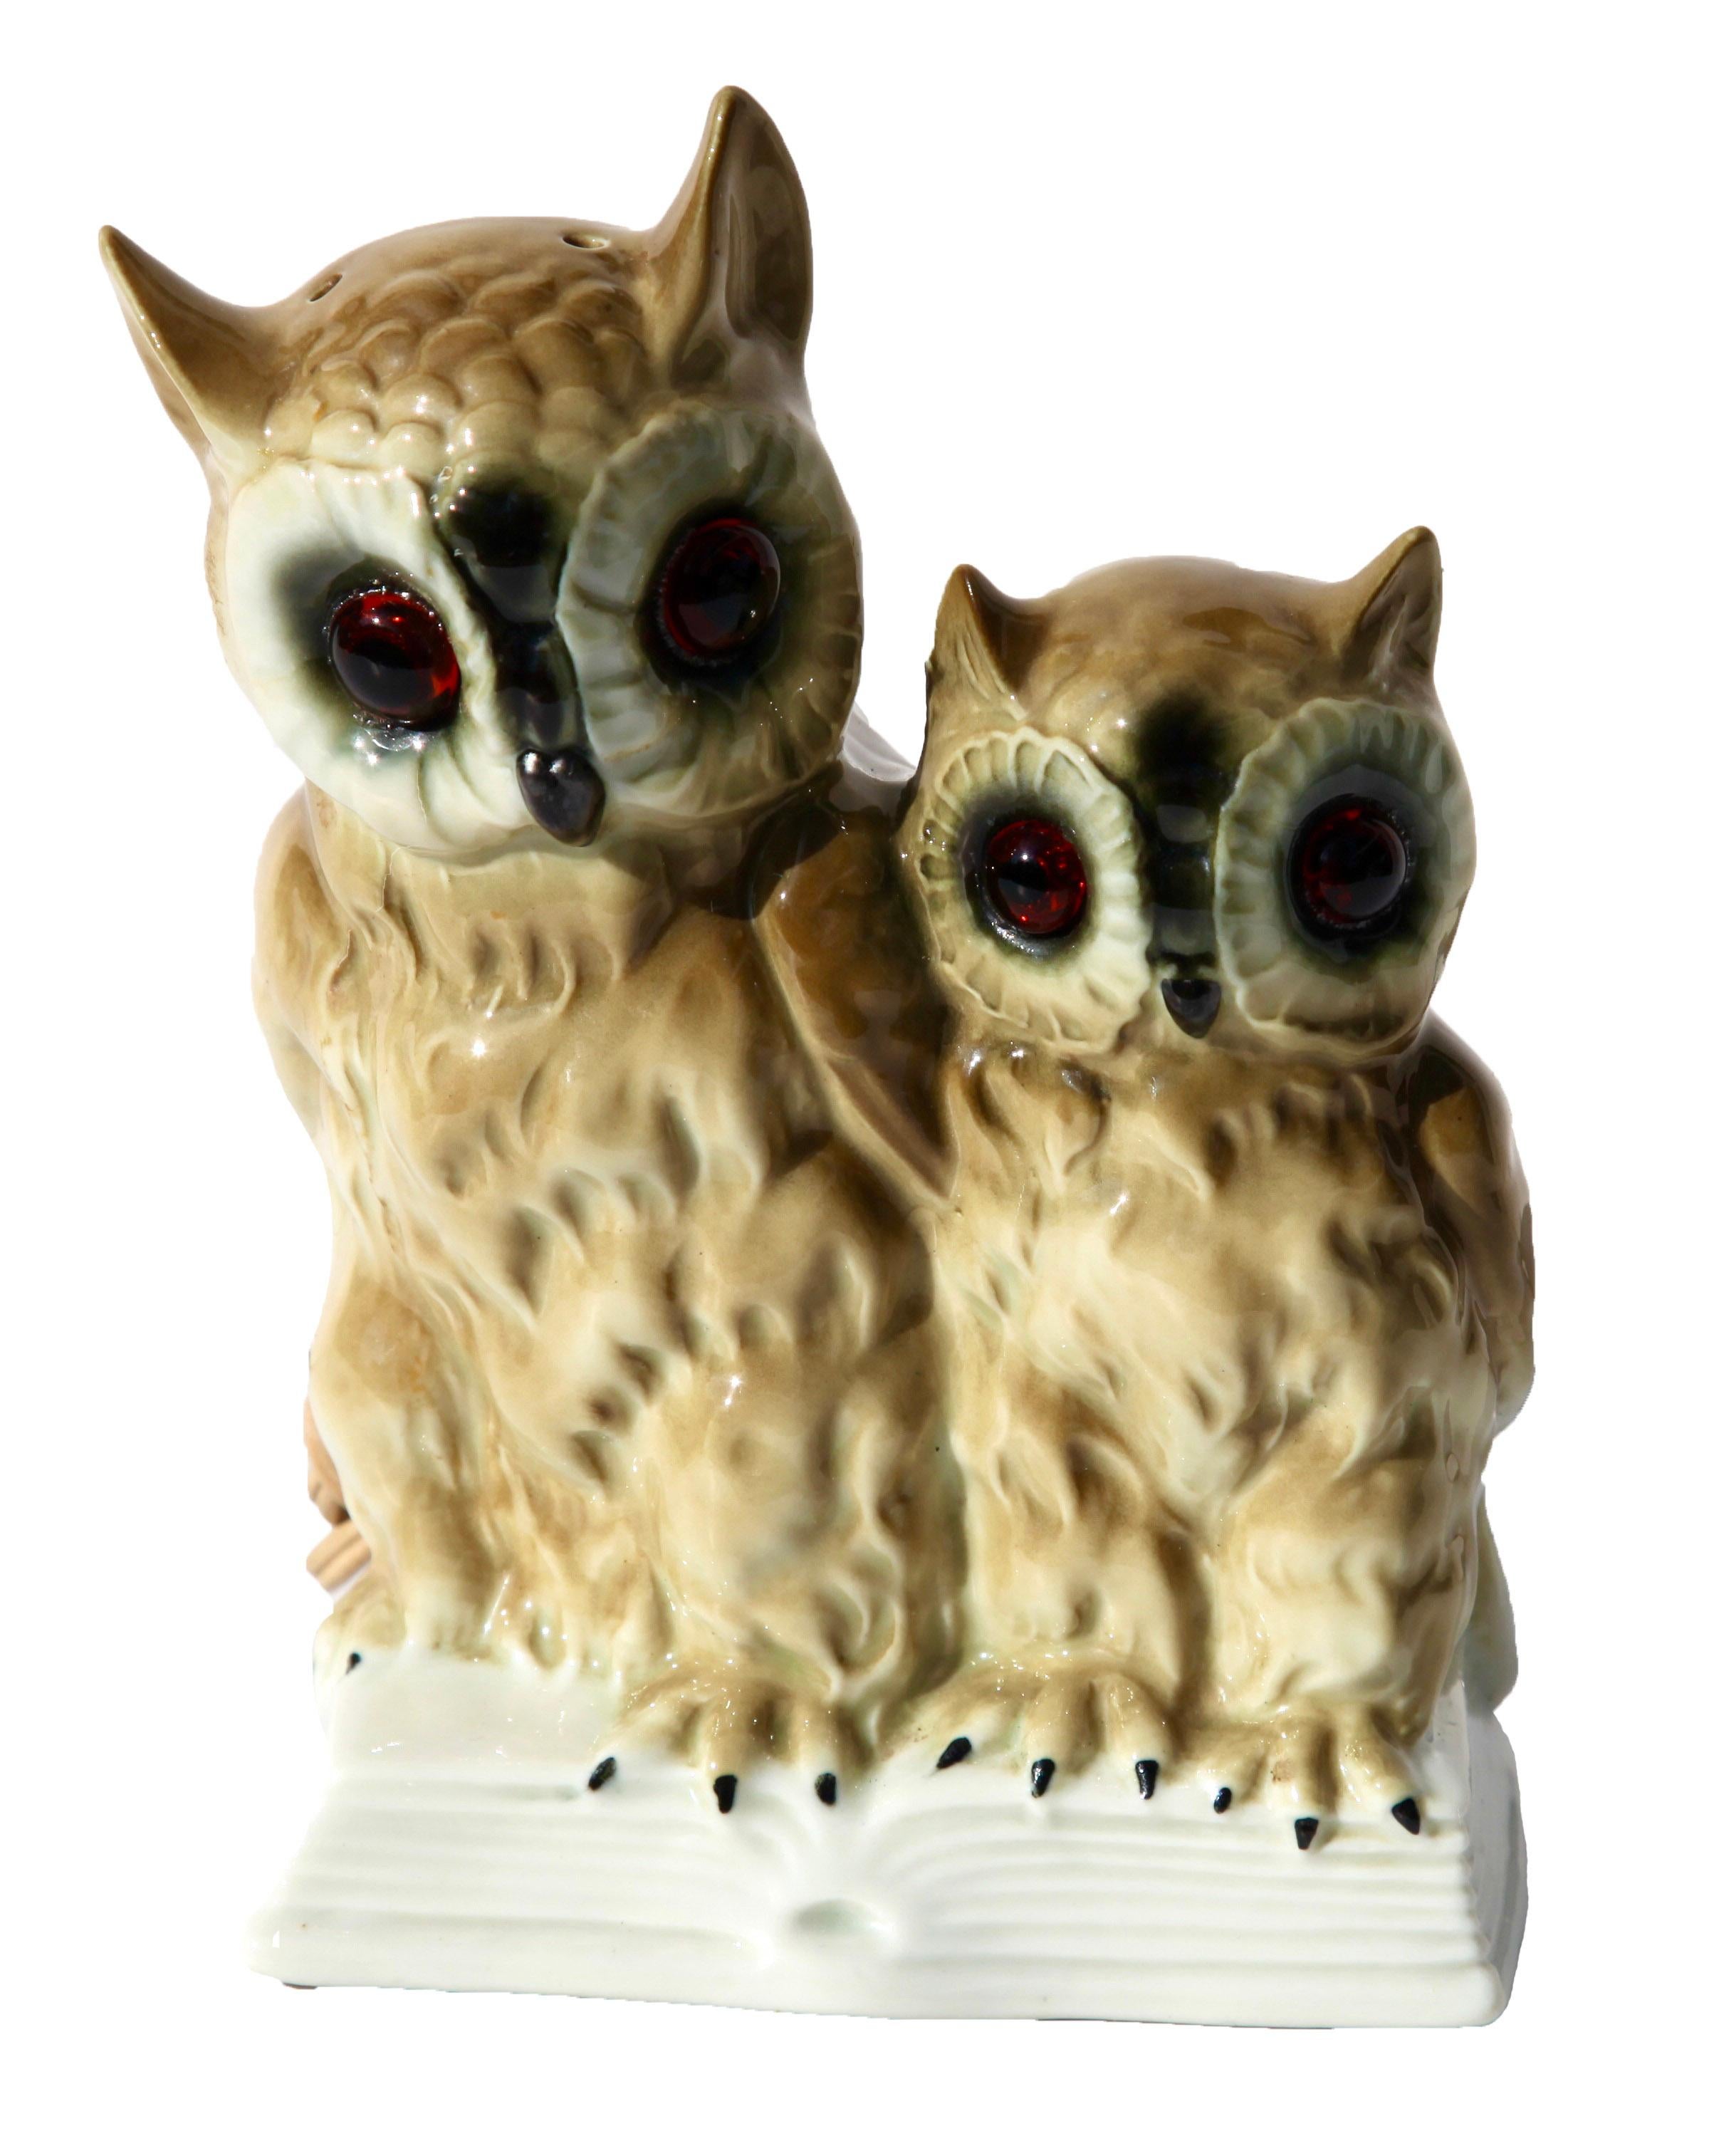 Perfume lamp in the form of a Mother owl and Chick attributed to Carl Scheidig Grafenthal, Germany. 
Made from glazed porcelain. 
Electrical parts European standards with an inner light bulb (standard E 14) to give a warm and comforting night